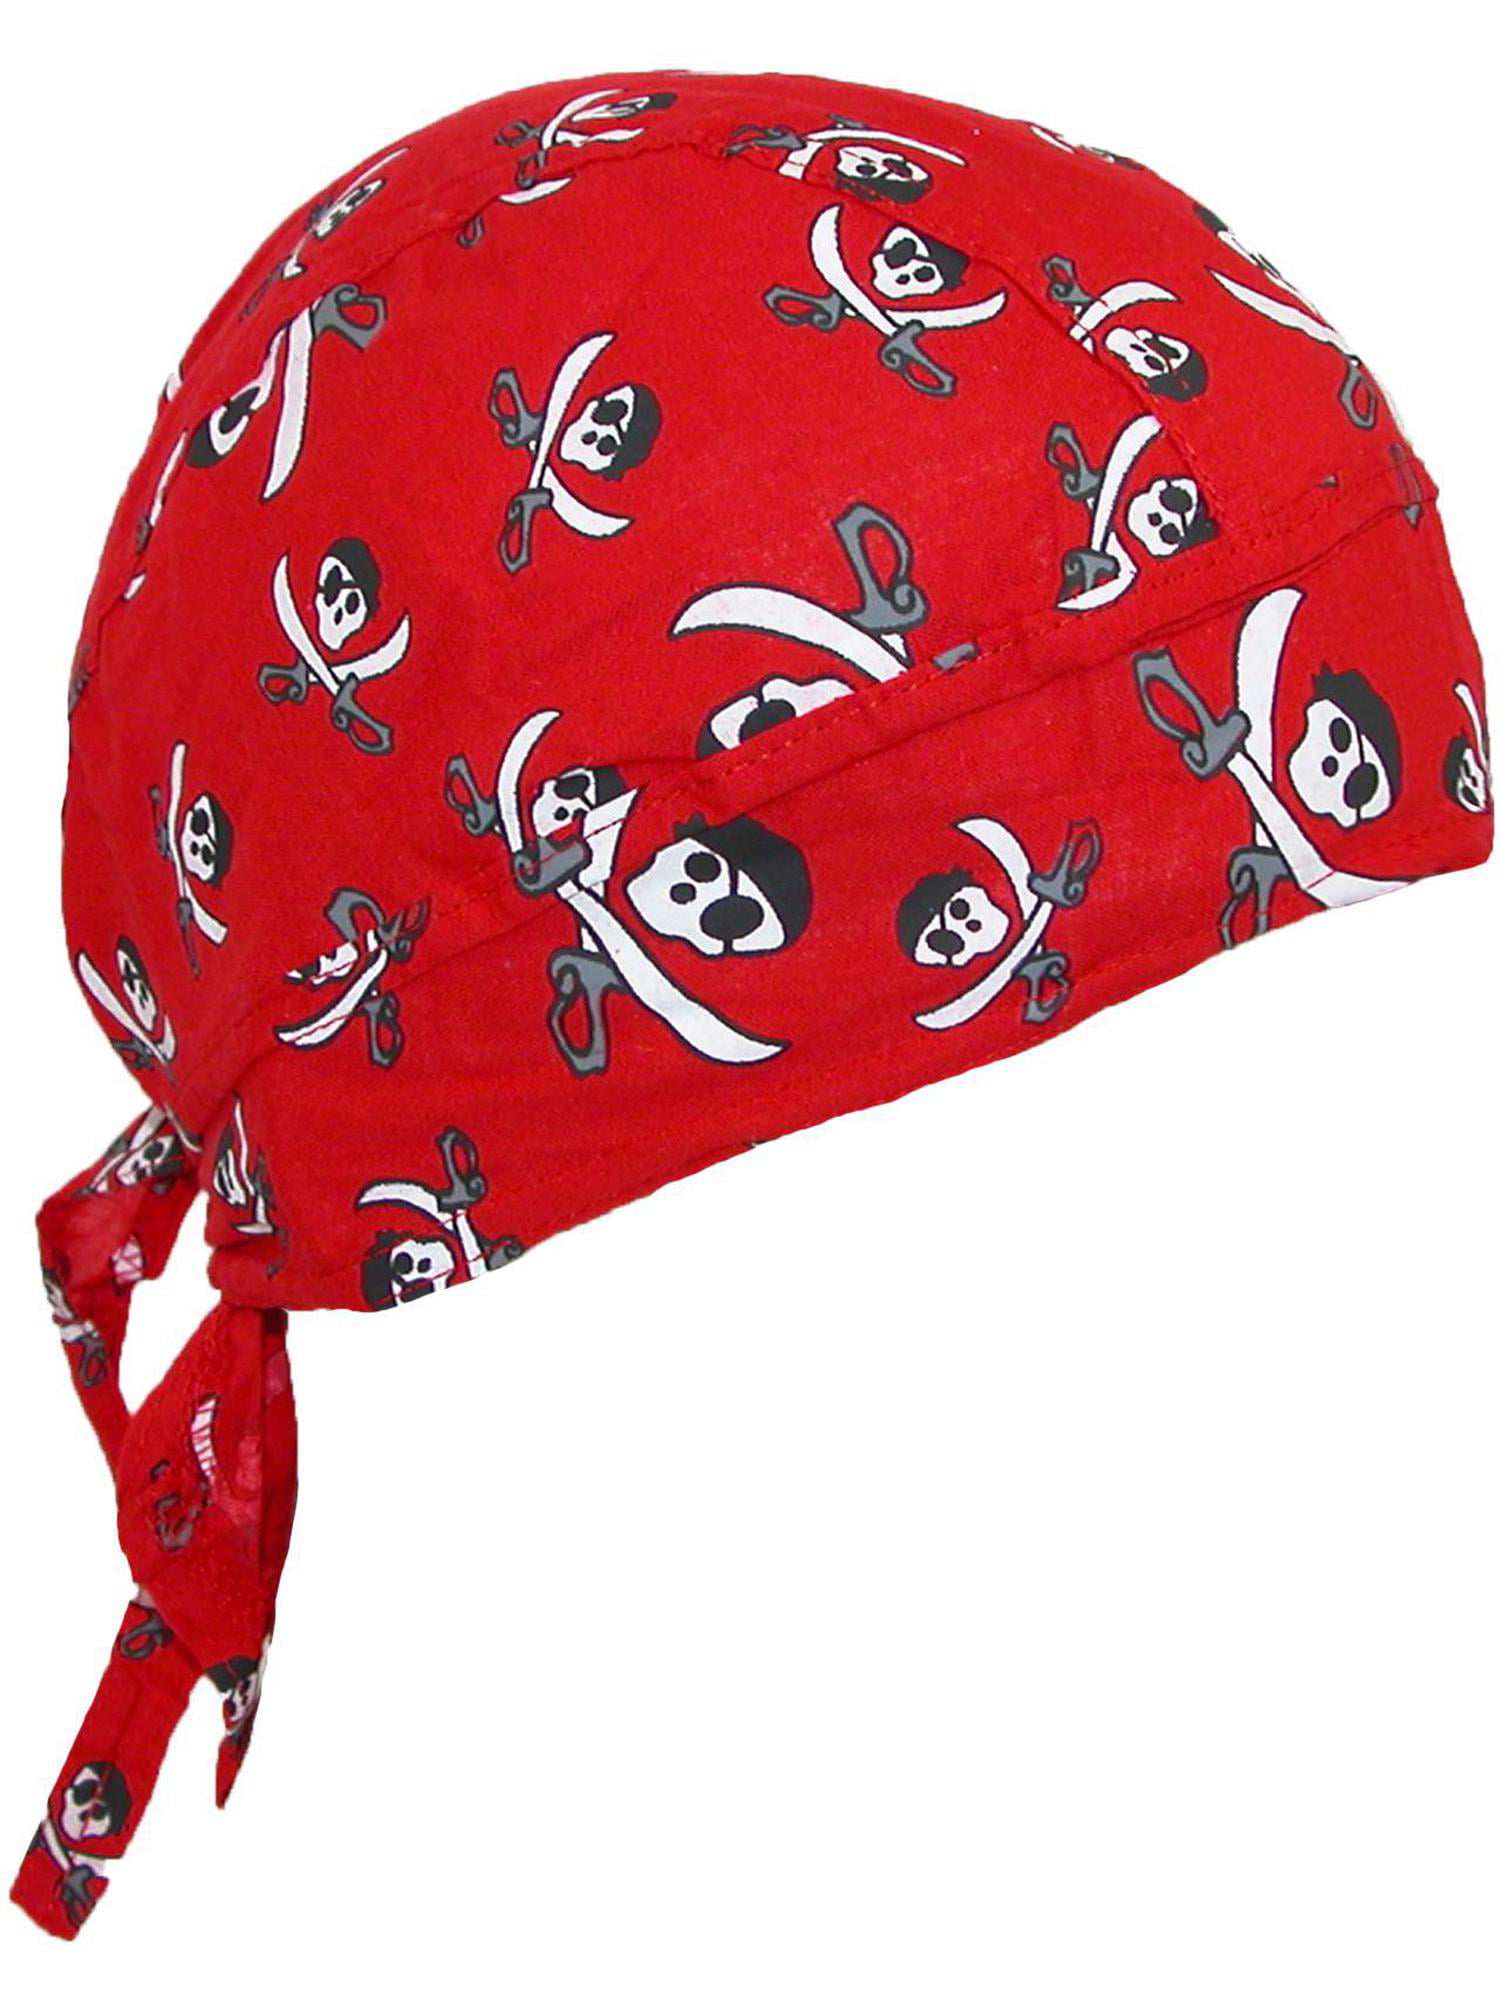 QUALITY RED PAISLEY SKULLCAP HEAD WRAP MADE IN THE USA BUILT IN SWEAT BAND 